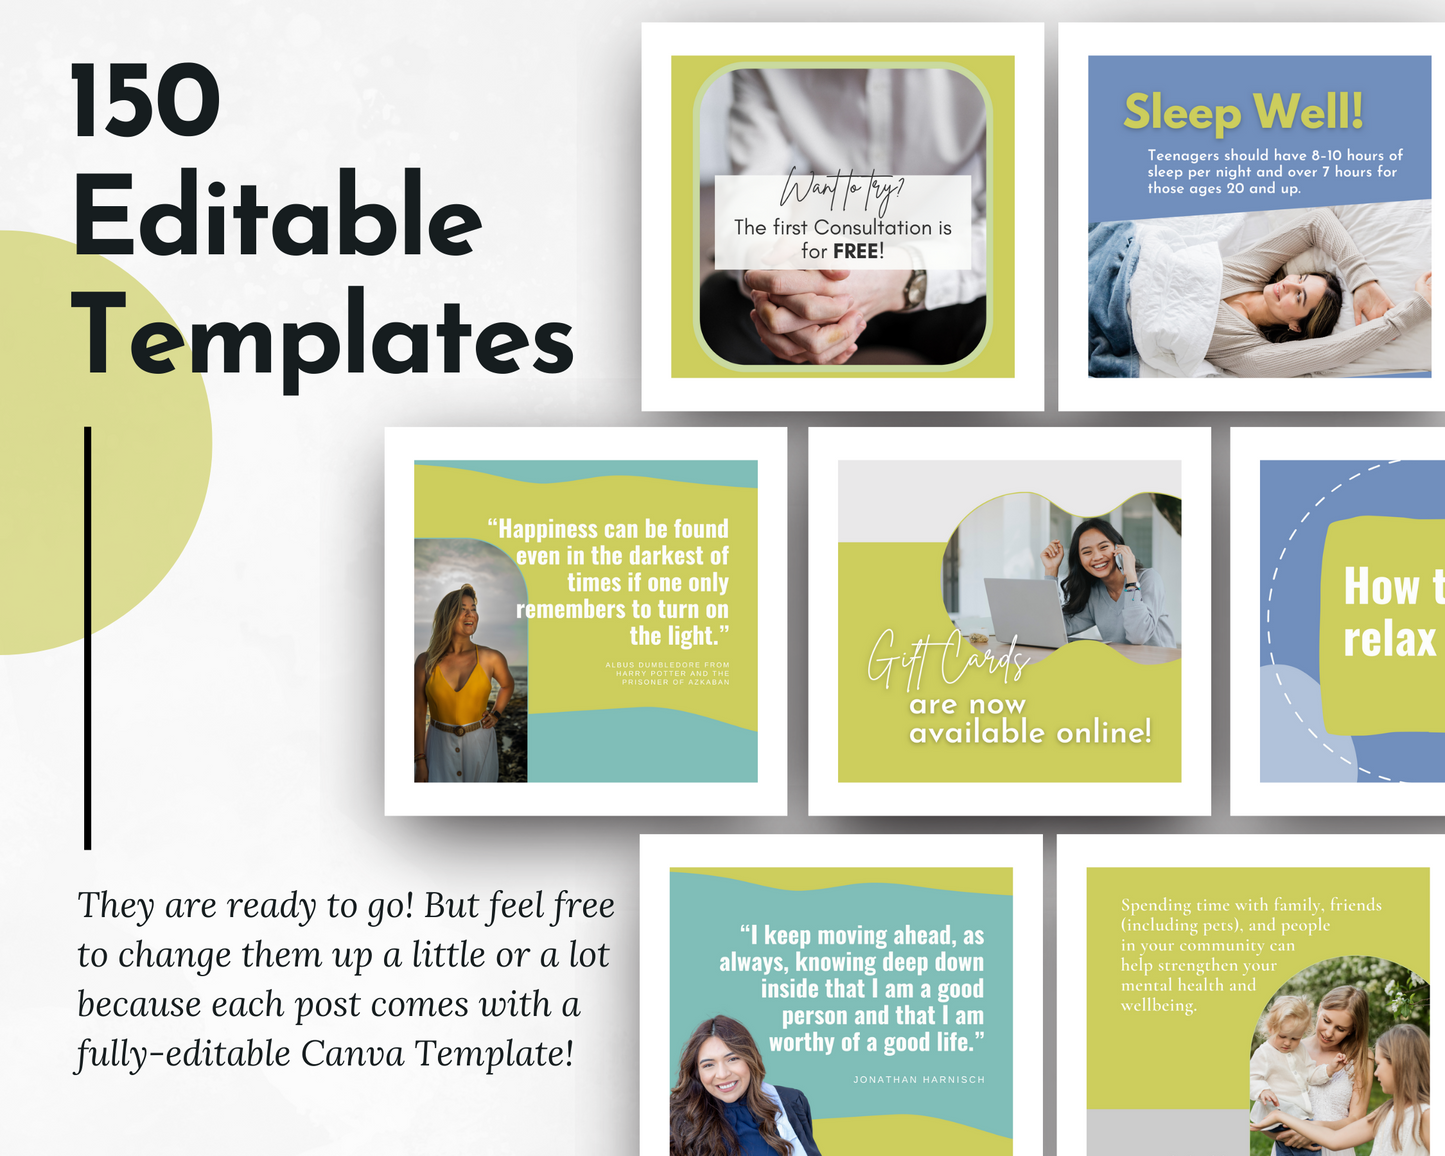 150 editable Instagram templates for professionals in the social media industry, featuring keywords related to Mental Health Social Media Post Bundle with Canva Templates from Socially Inclined.